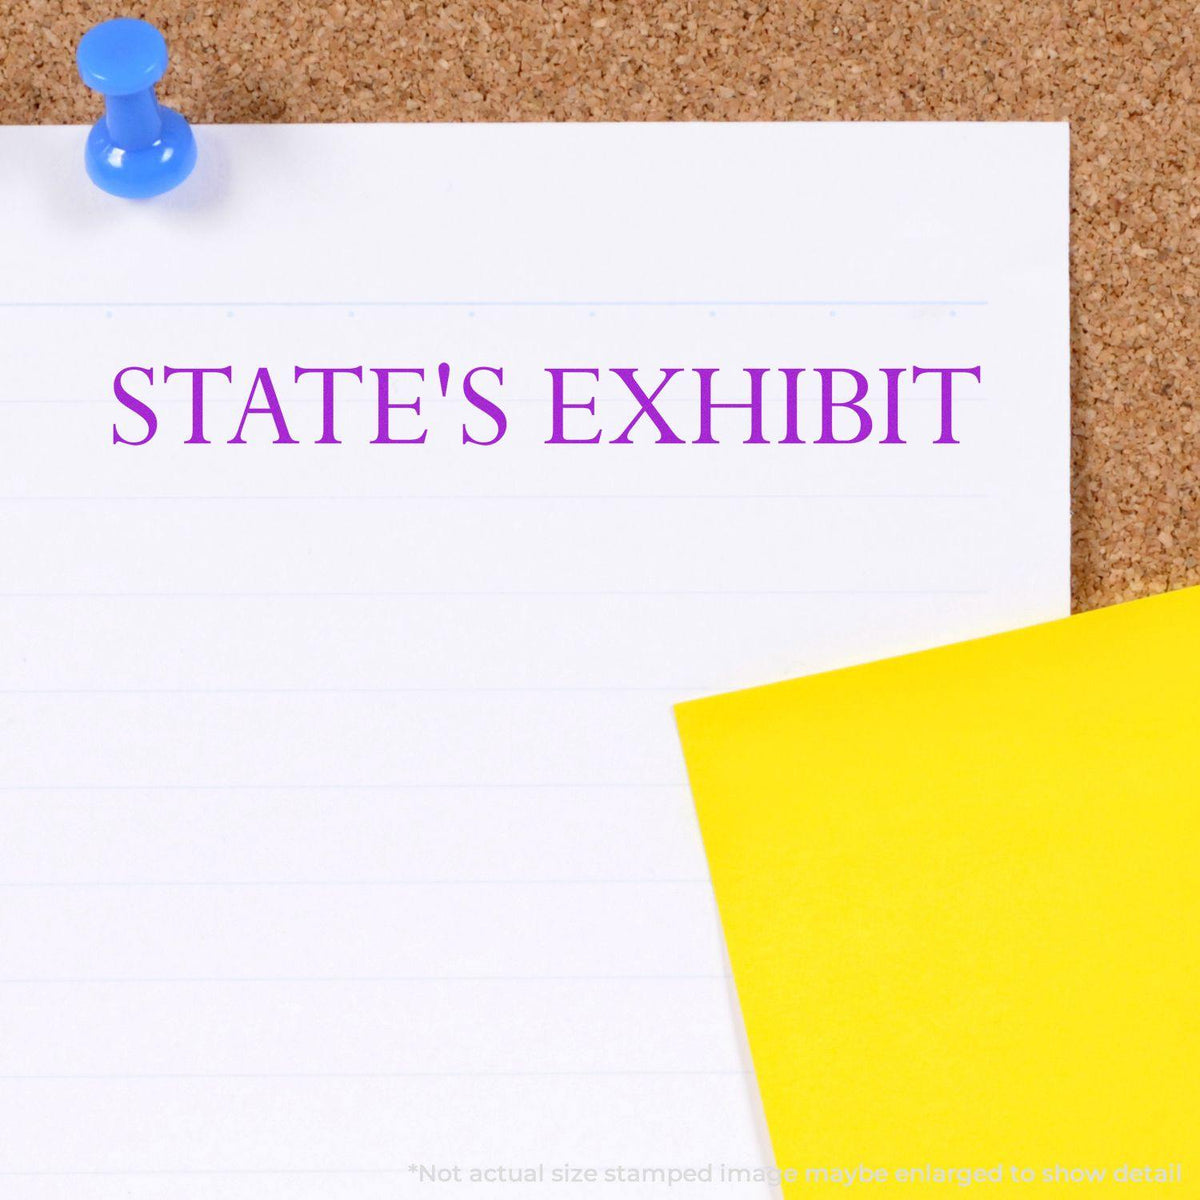 Large States Exhibit Rubber Stamp - Engineer Seal Stamps - Brand_Acorn, Impression Size_Large, Stamp Type_Regular Stamp, Type of Use_Legal